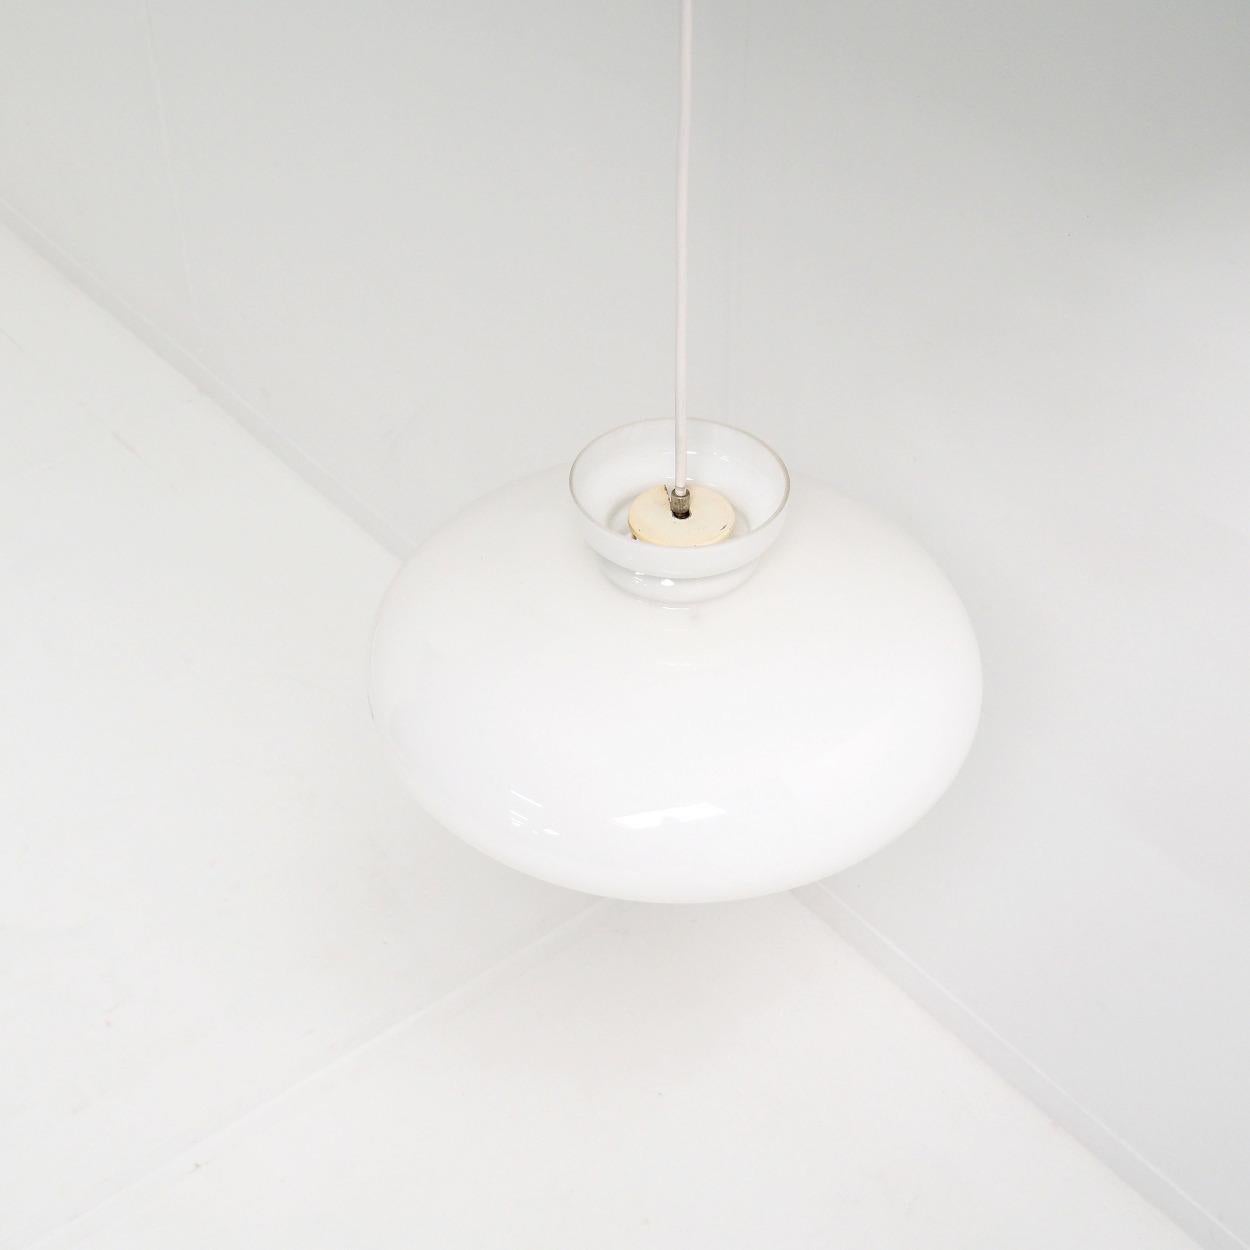 Mid-Century Modern Lamp B-1008, or ‘The Bowl’, by Raak Amsterdam For Sale